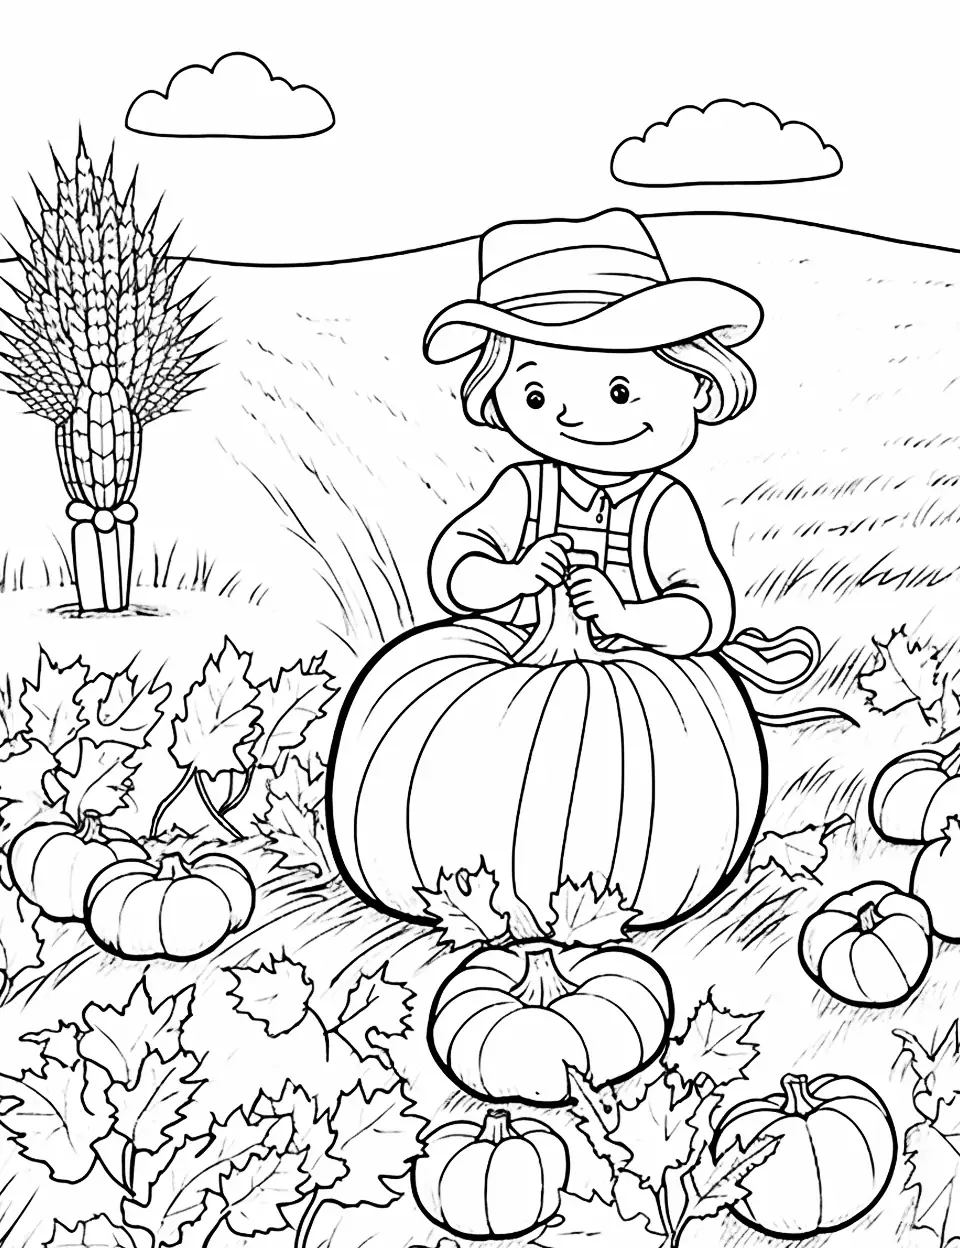 Harvesting Pumpkins Thanksgiving Coloring Page - A difficult harvest scene for kids to color.